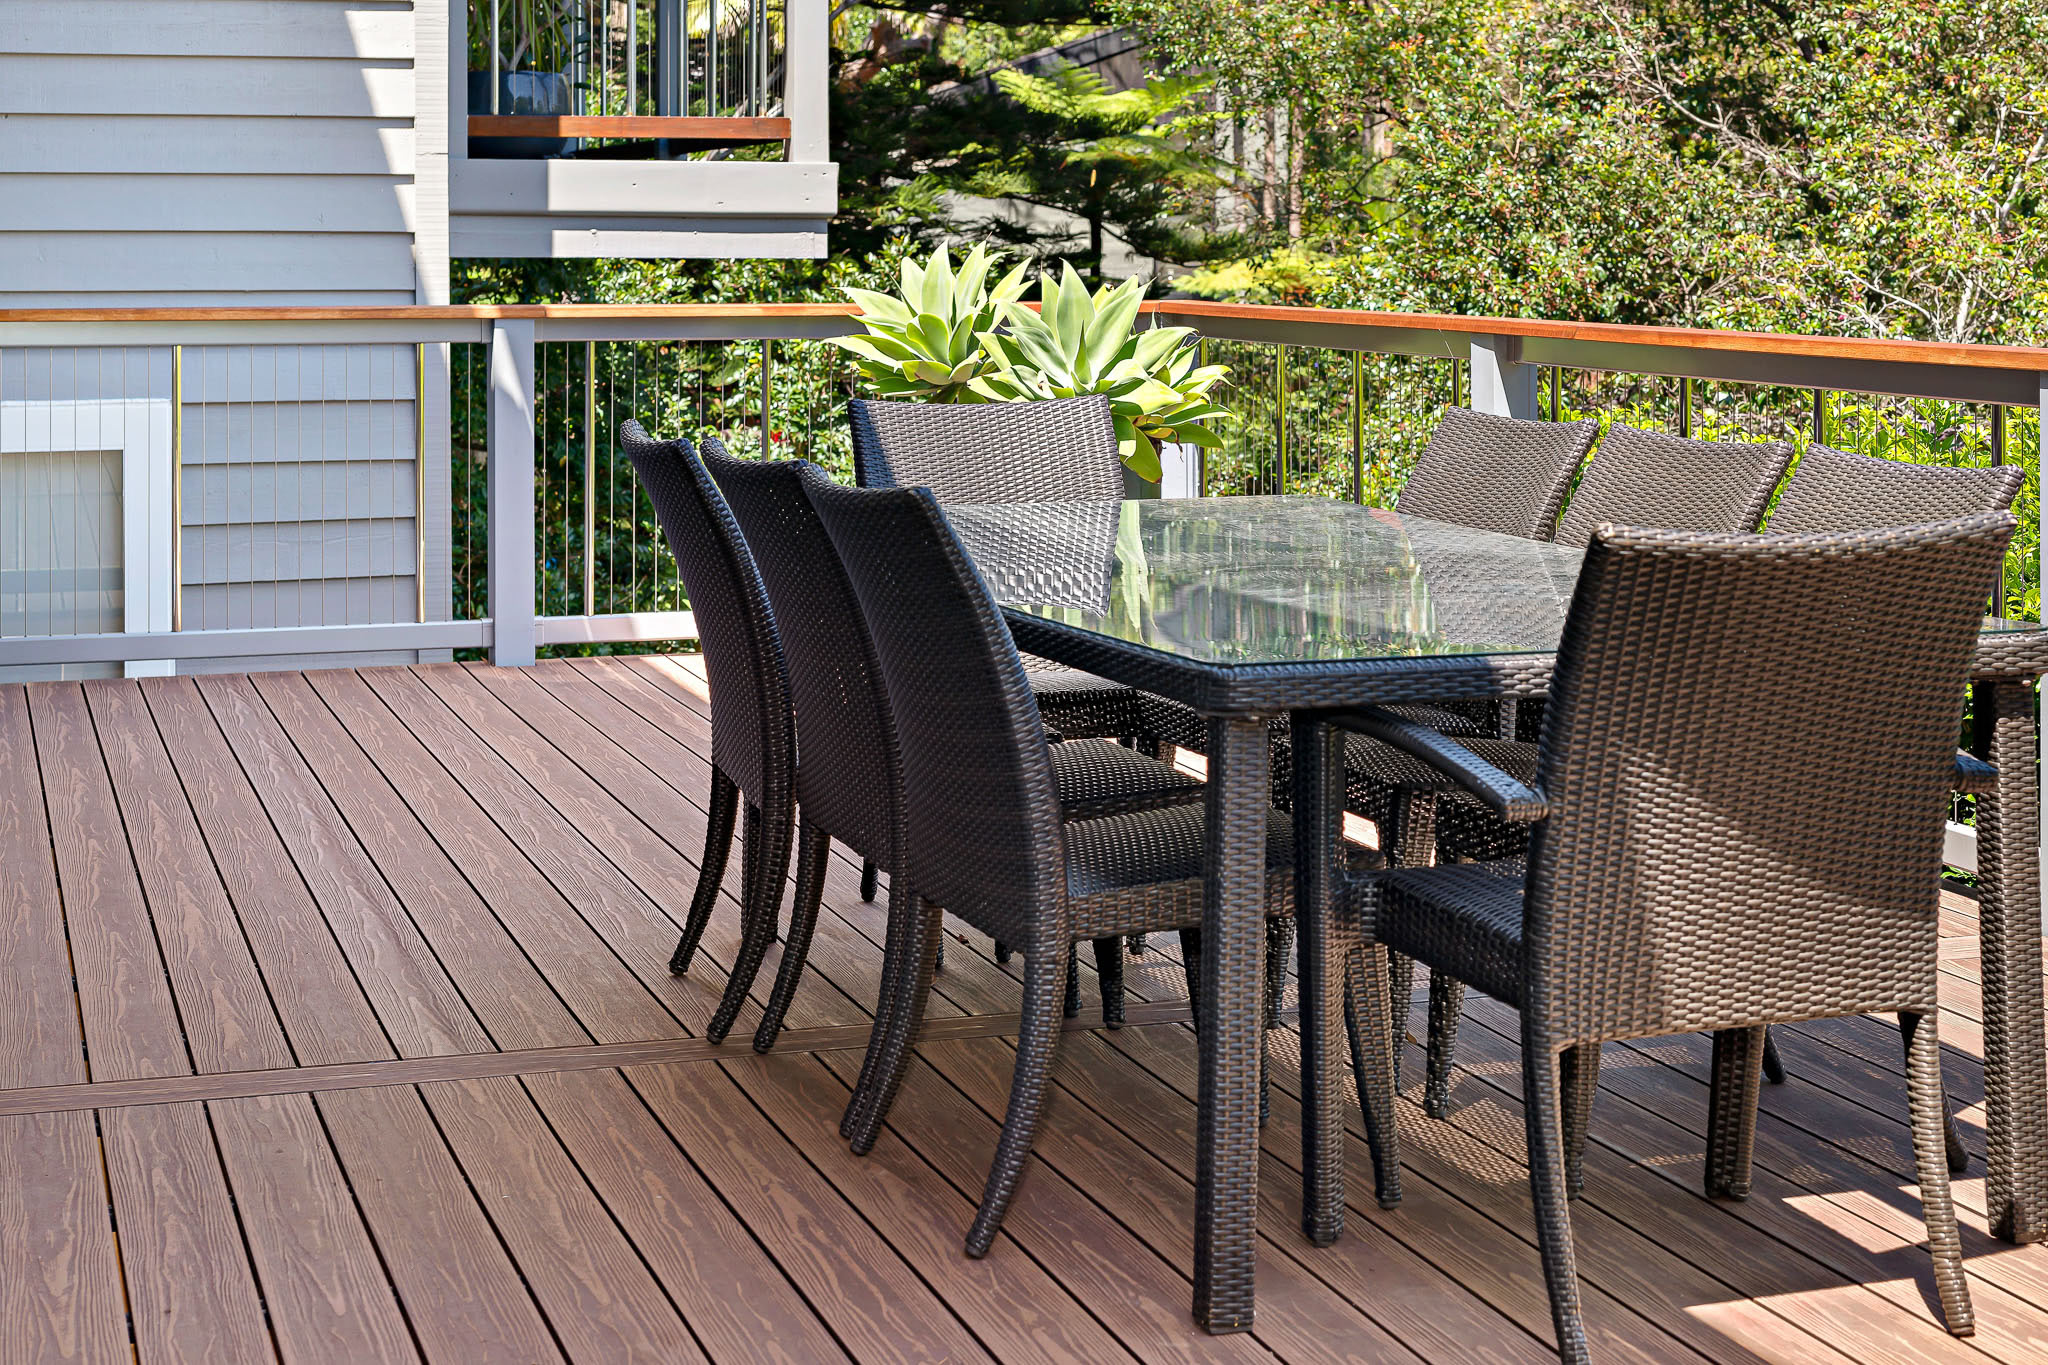 Cane chairs and table accenting an Arabica Composite Deck